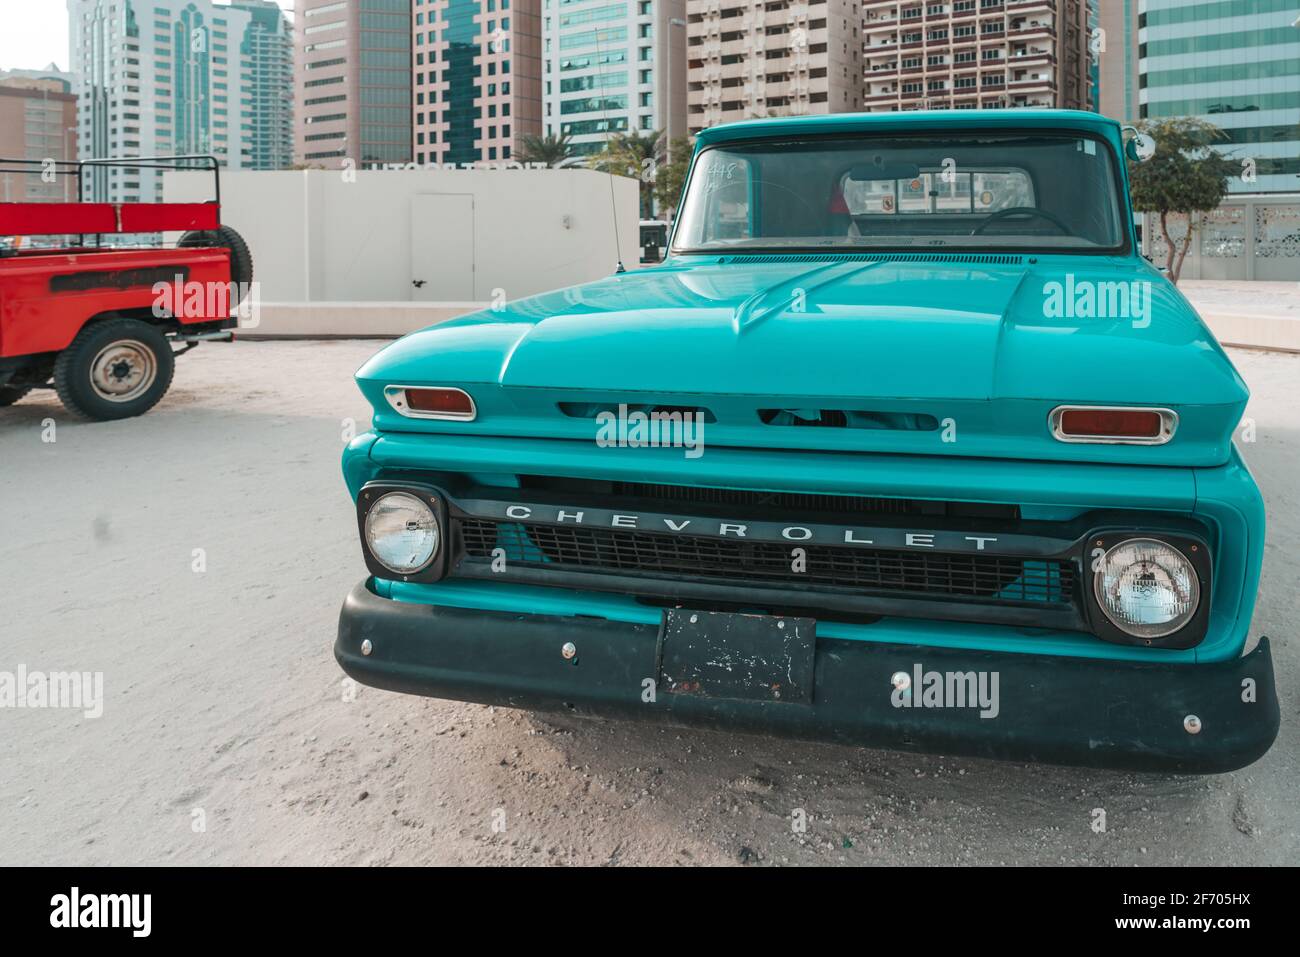 Classic Chevrolet pickup truck automobile displayed in Abu Dhabi, UAE |  American sports car | vintage style and design Stock Photo